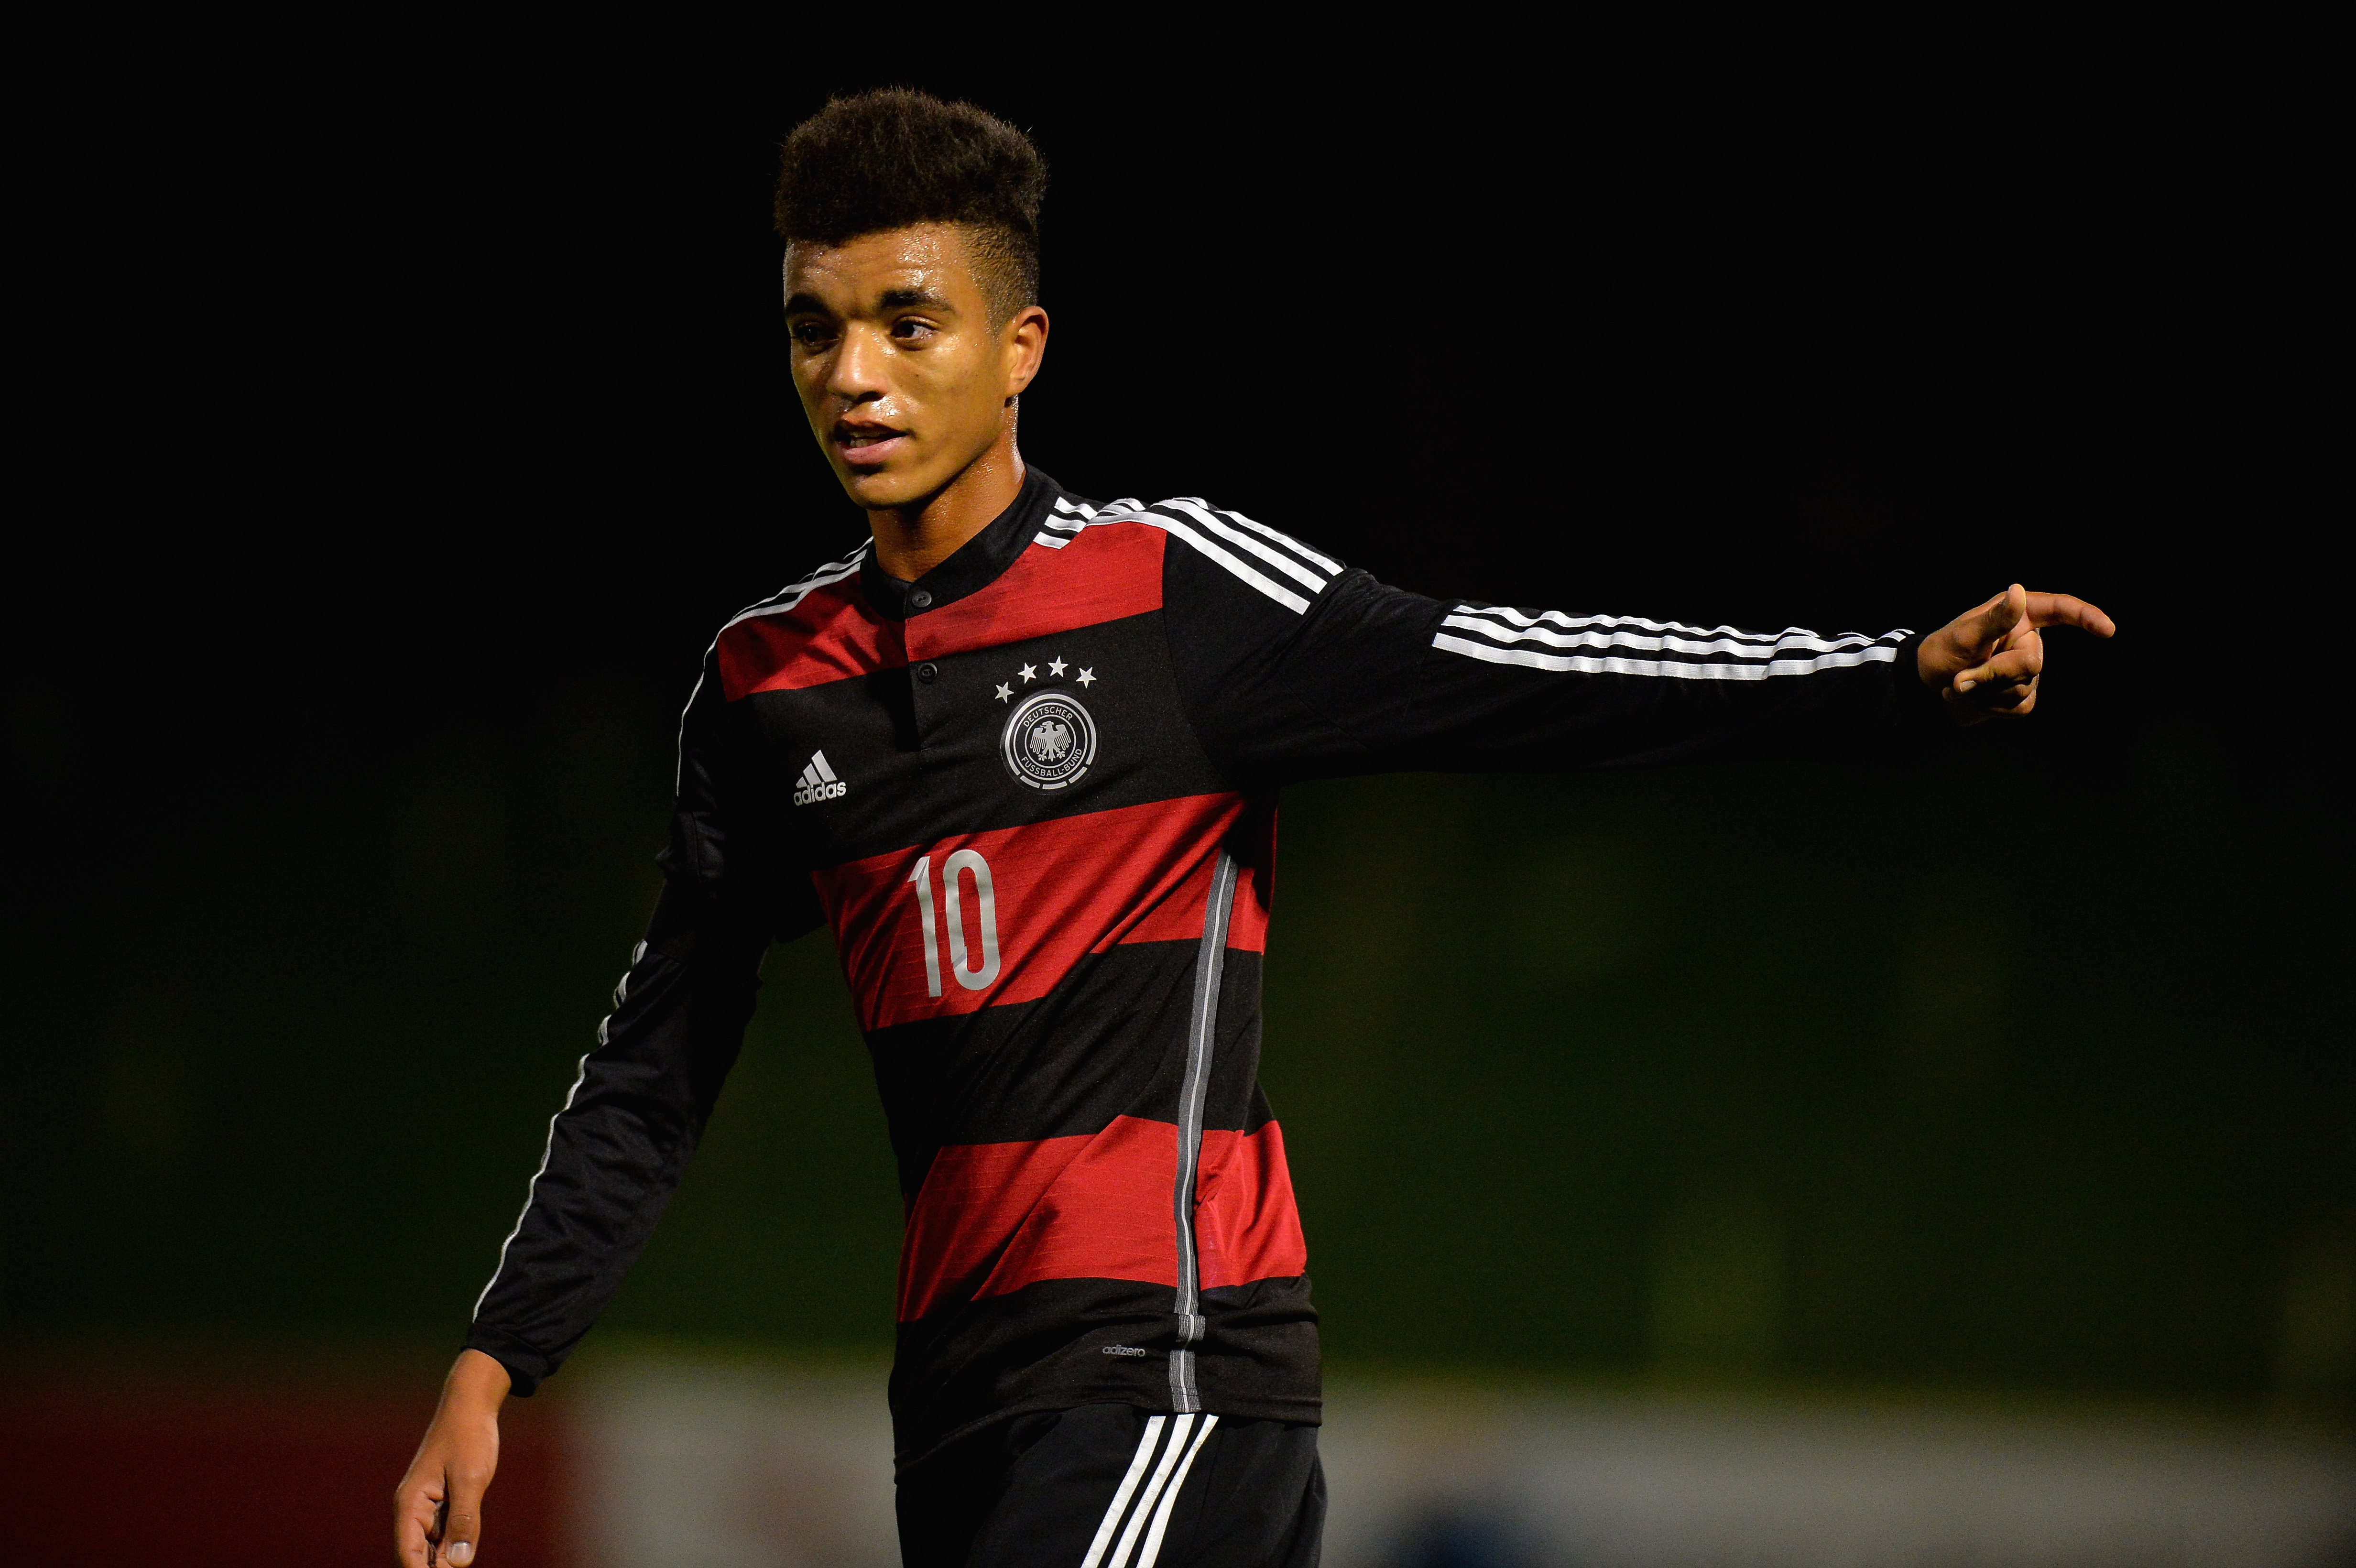 BURTON-UPON-TRENT, ENGLAND - NOVEMBER 18:  Timothy Tillman of Germany during the U17s International Friendly match between England U17 and Germany U17 at St Georges Park on November 18, 2015 in Burton-upon-Trent, England. (Photo by Tony Marshall/Getty Images)